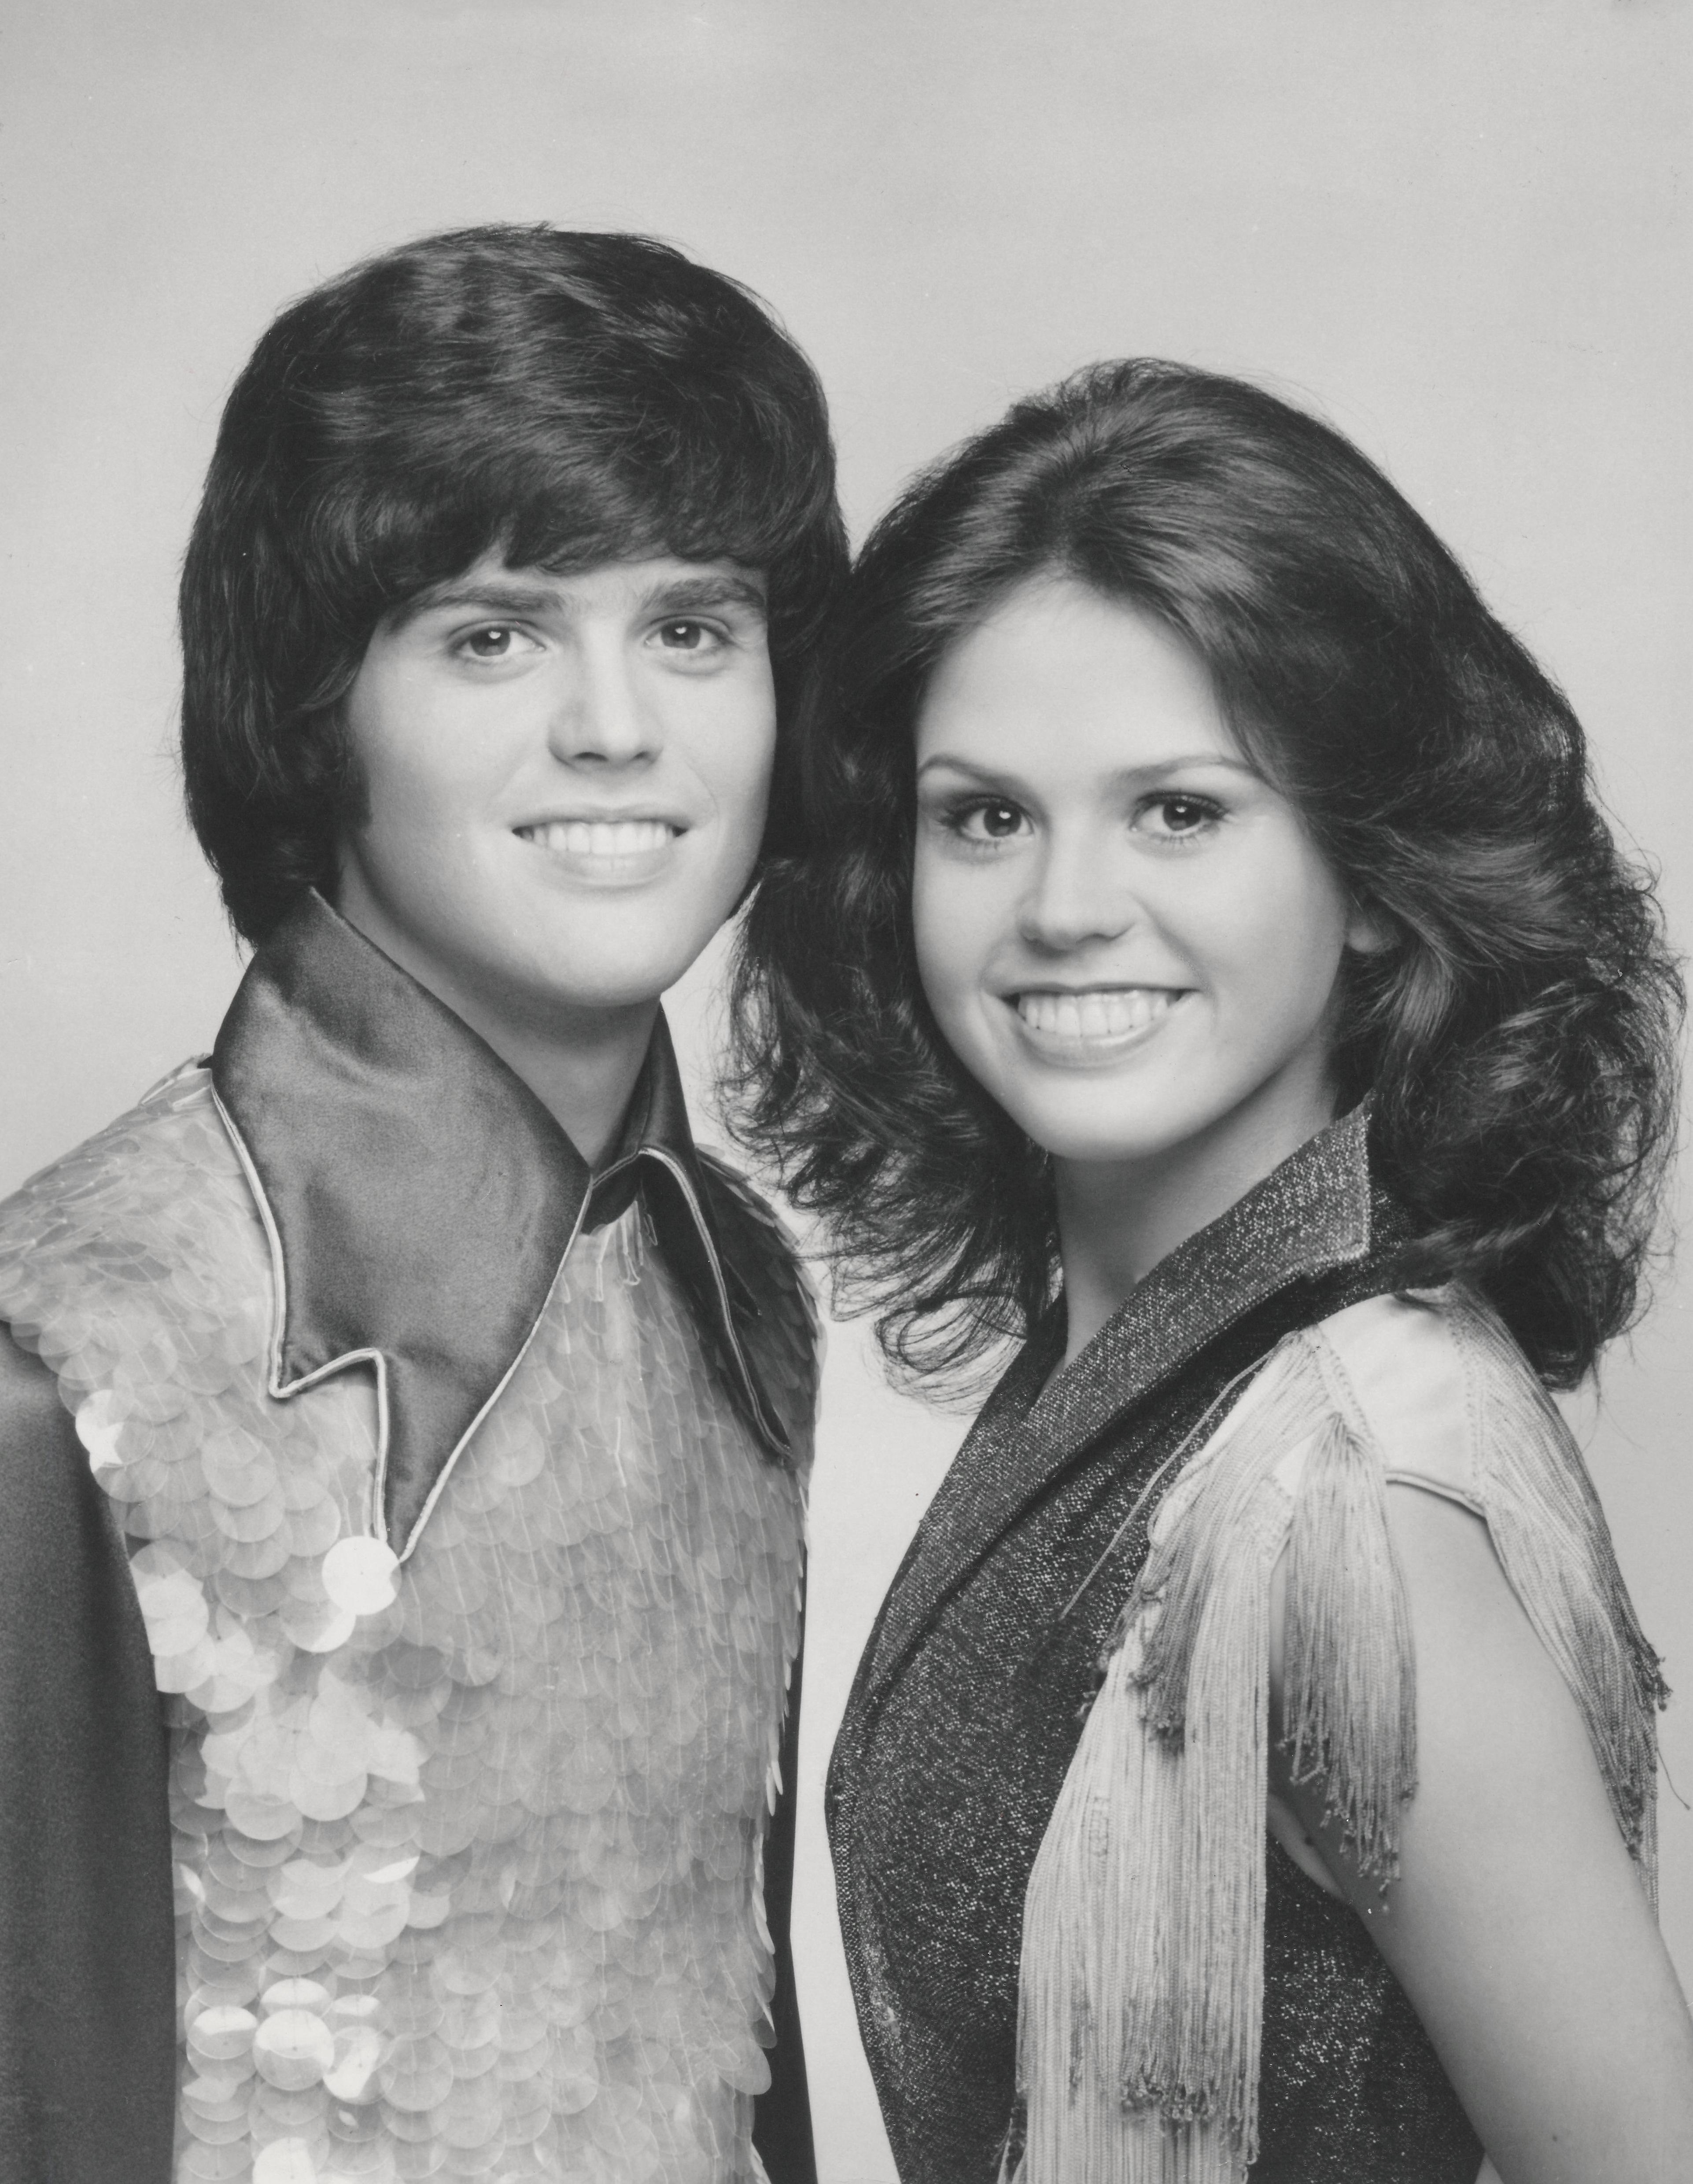 Unknown Portrait Photograph - Donny and Marie Musical Duo Smiling Globe Photos Fine Art Print